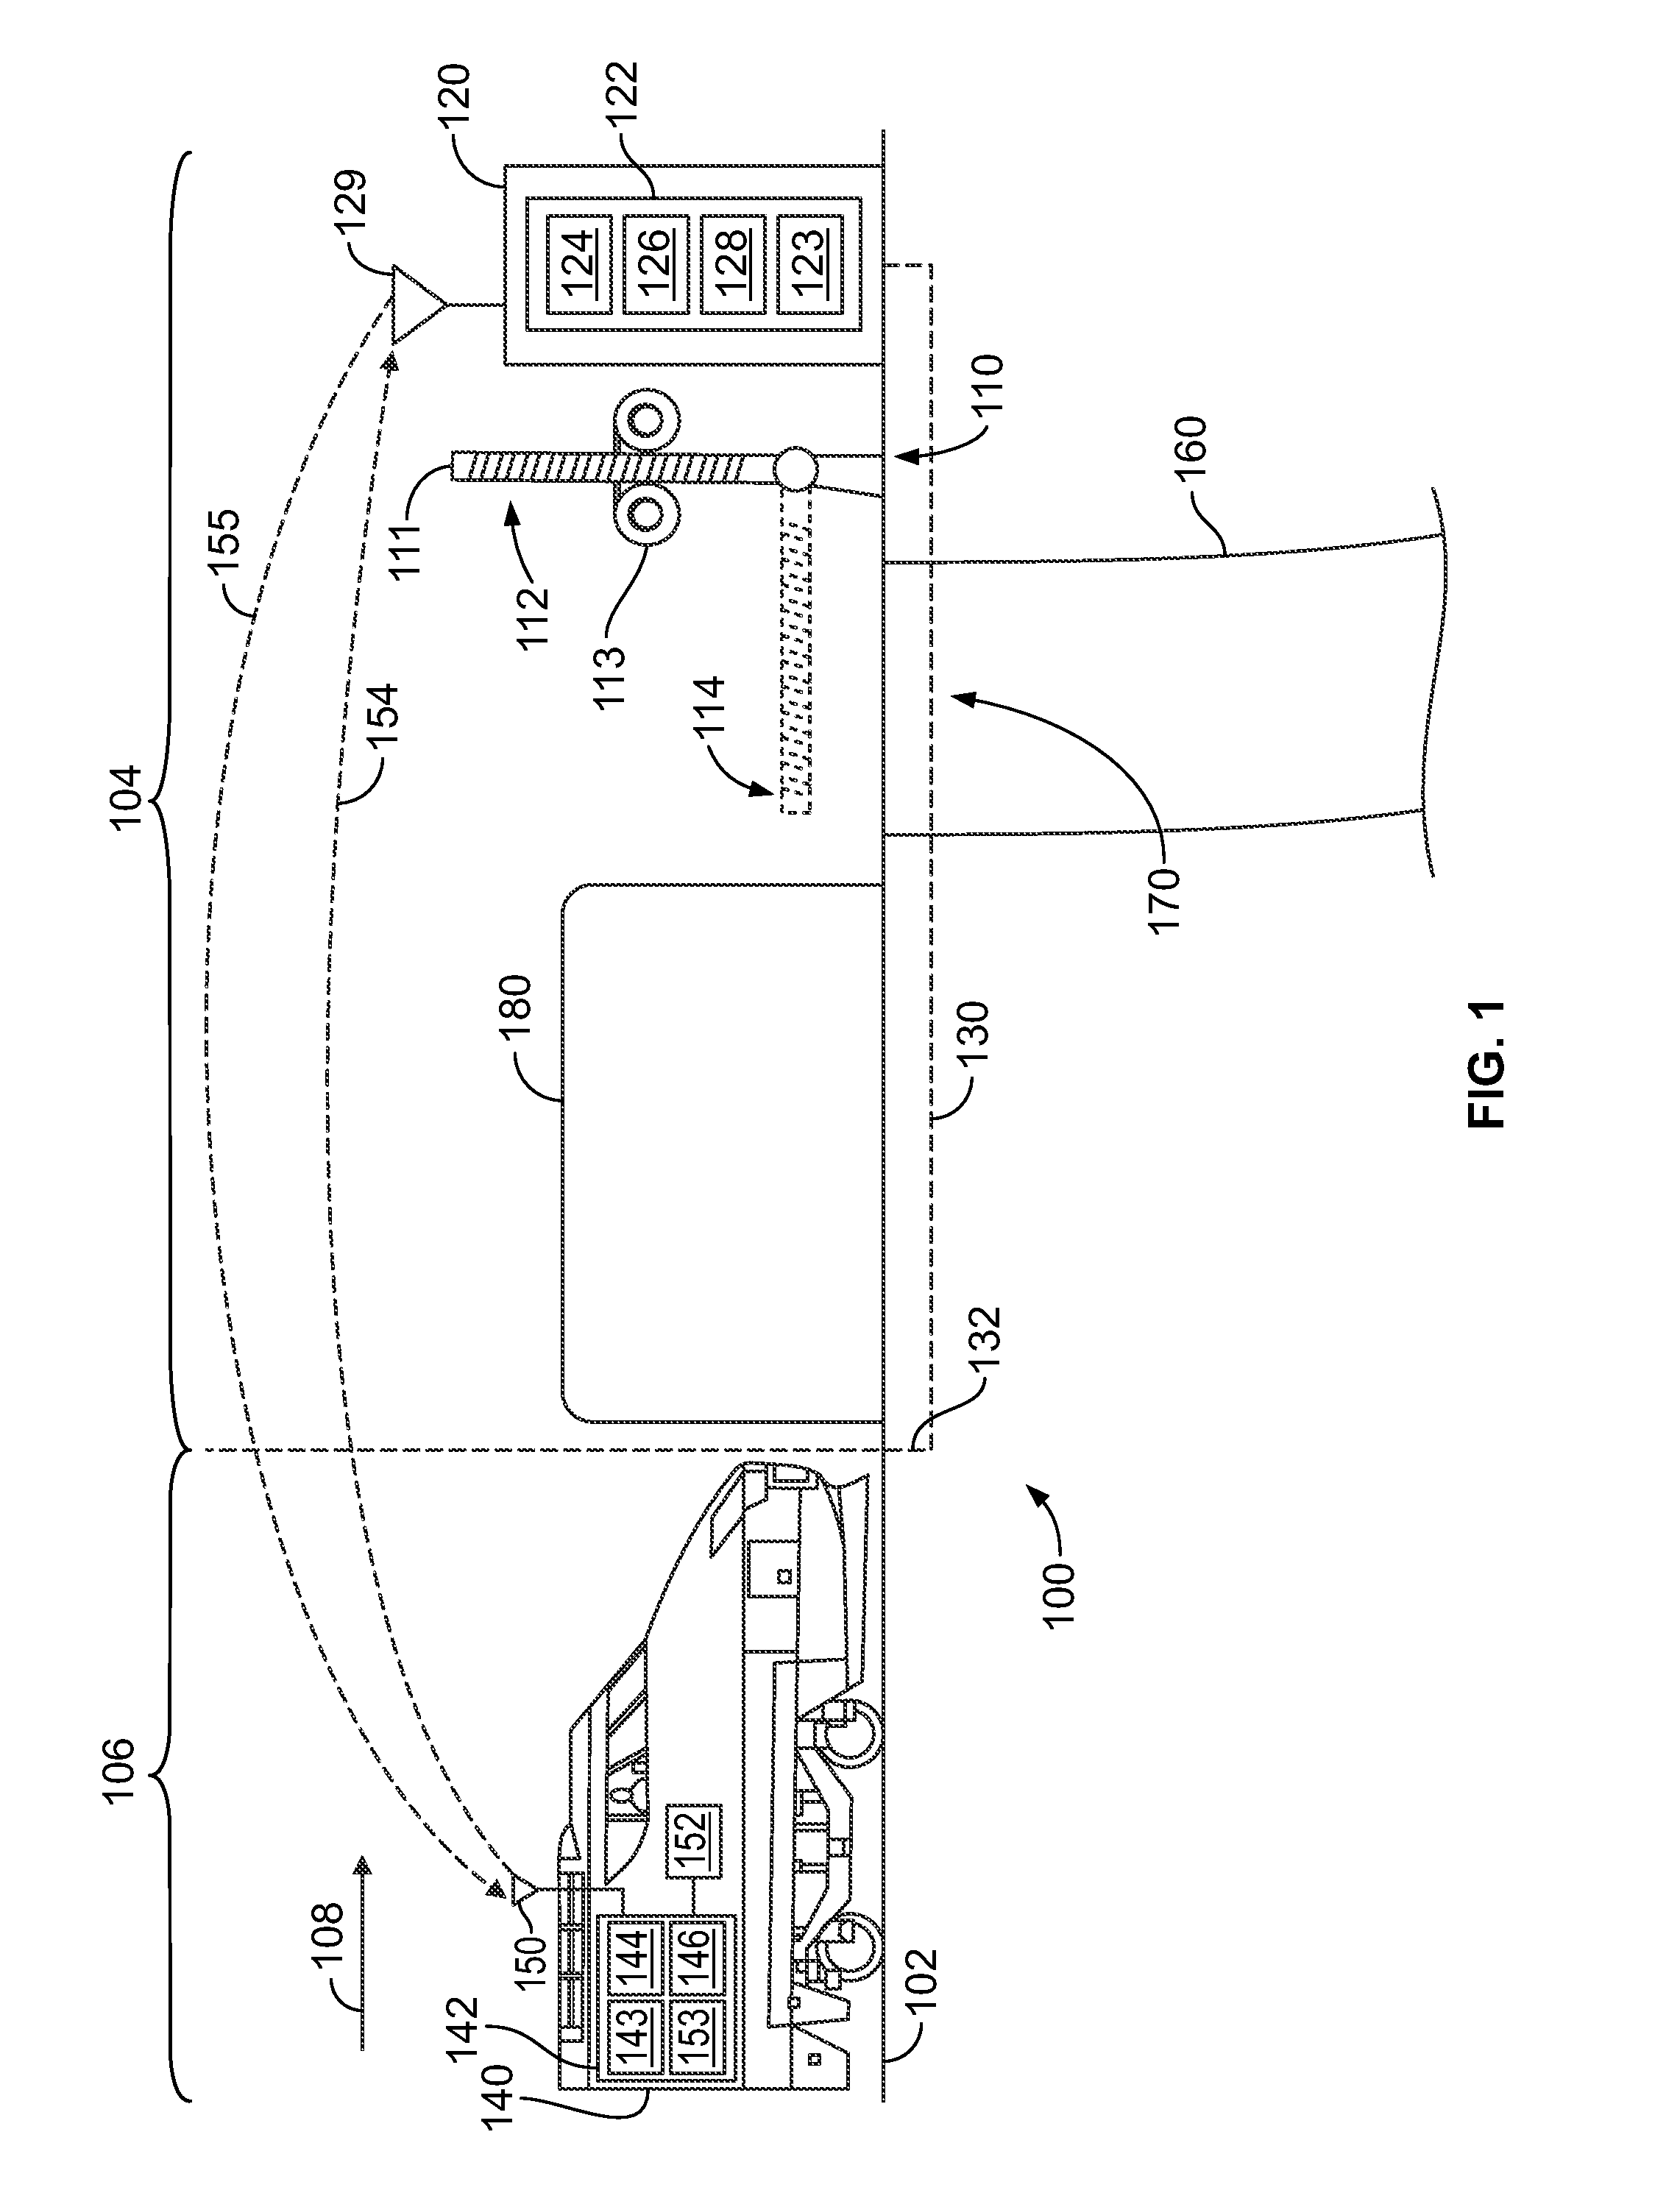 Systems and Methods for Management of Crossings Near Stations